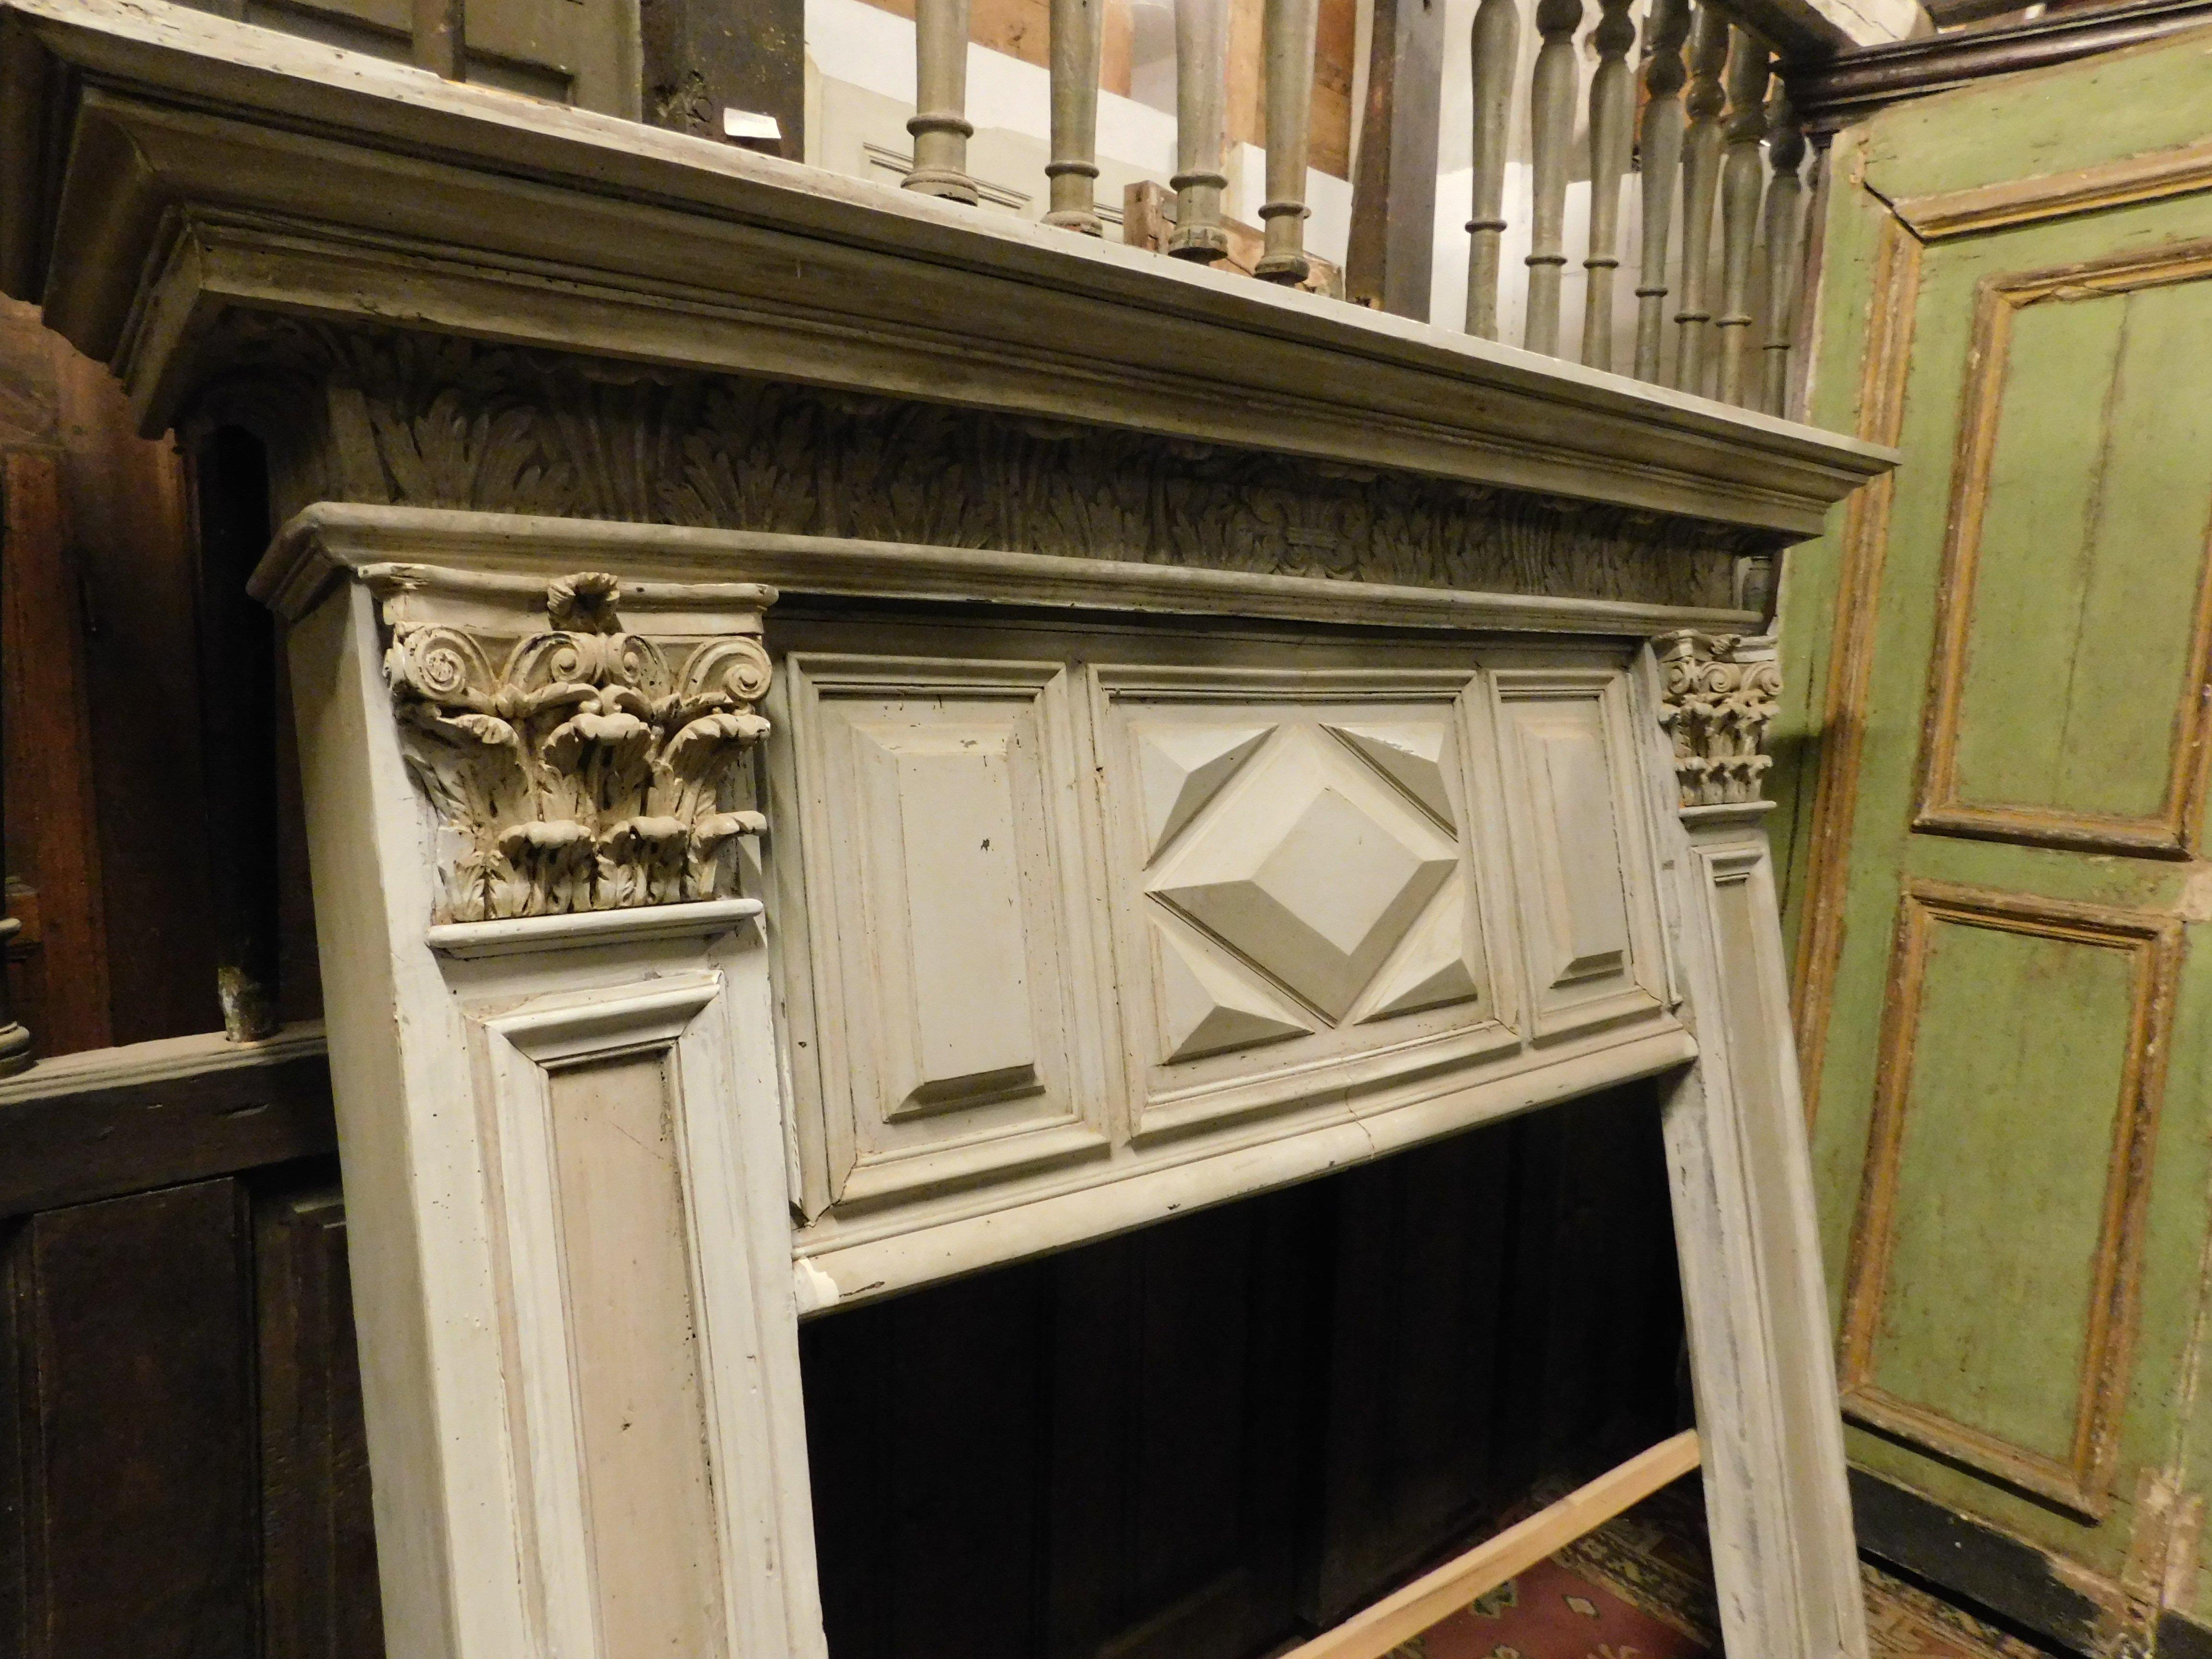 Antique old vintage fireplace mantle, built in solid poplar wood, hand lacquered in single color grey, enriched with sculpted tiles, has a sculpted pediment with geometric decorations. Legs with sculpted columns and capitals, built in the 19th